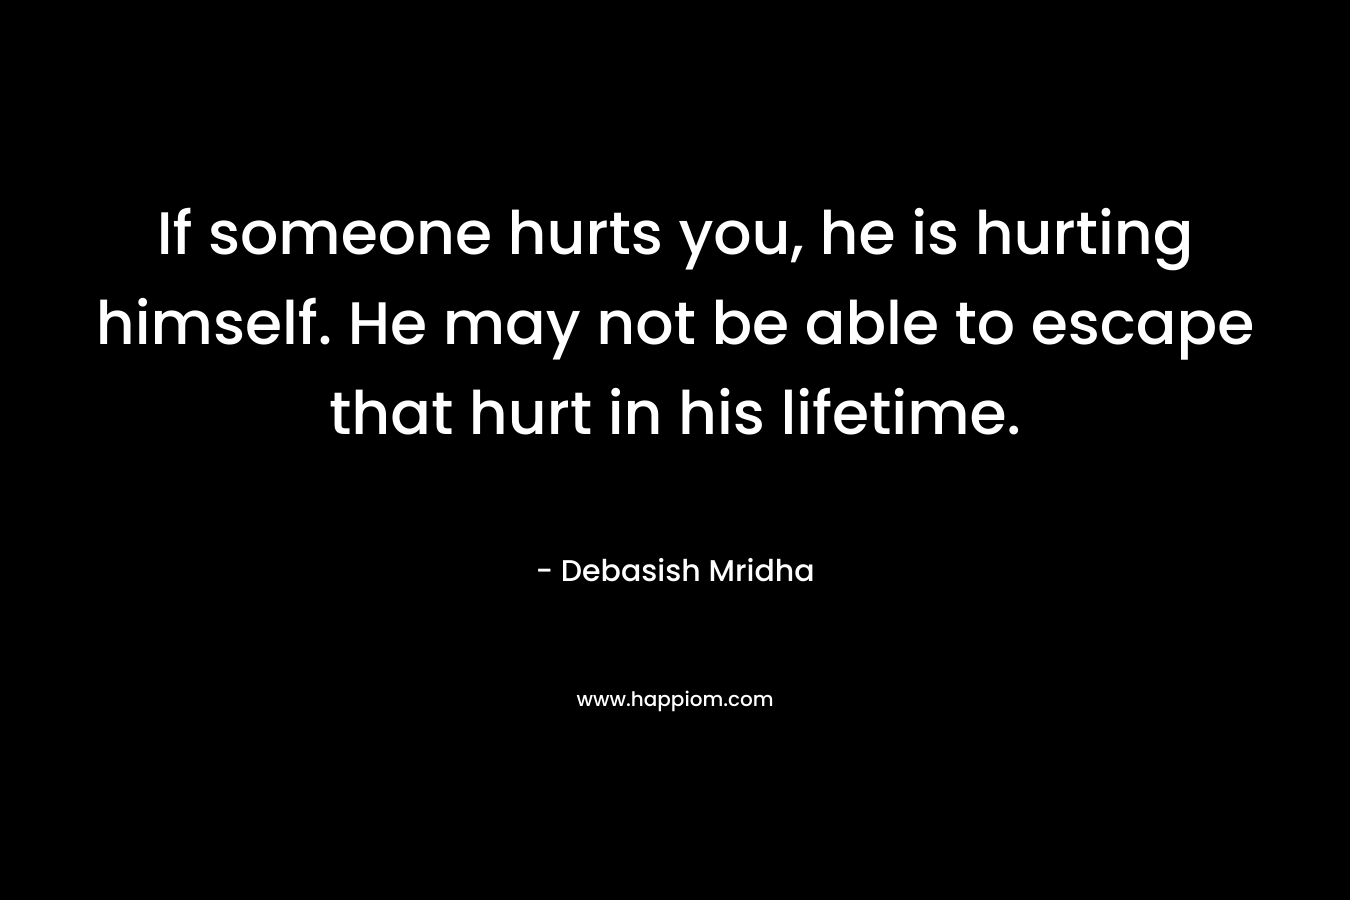 If someone hurts you, he is hurting himself. He may not be able to escape that hurt in his lifetime.